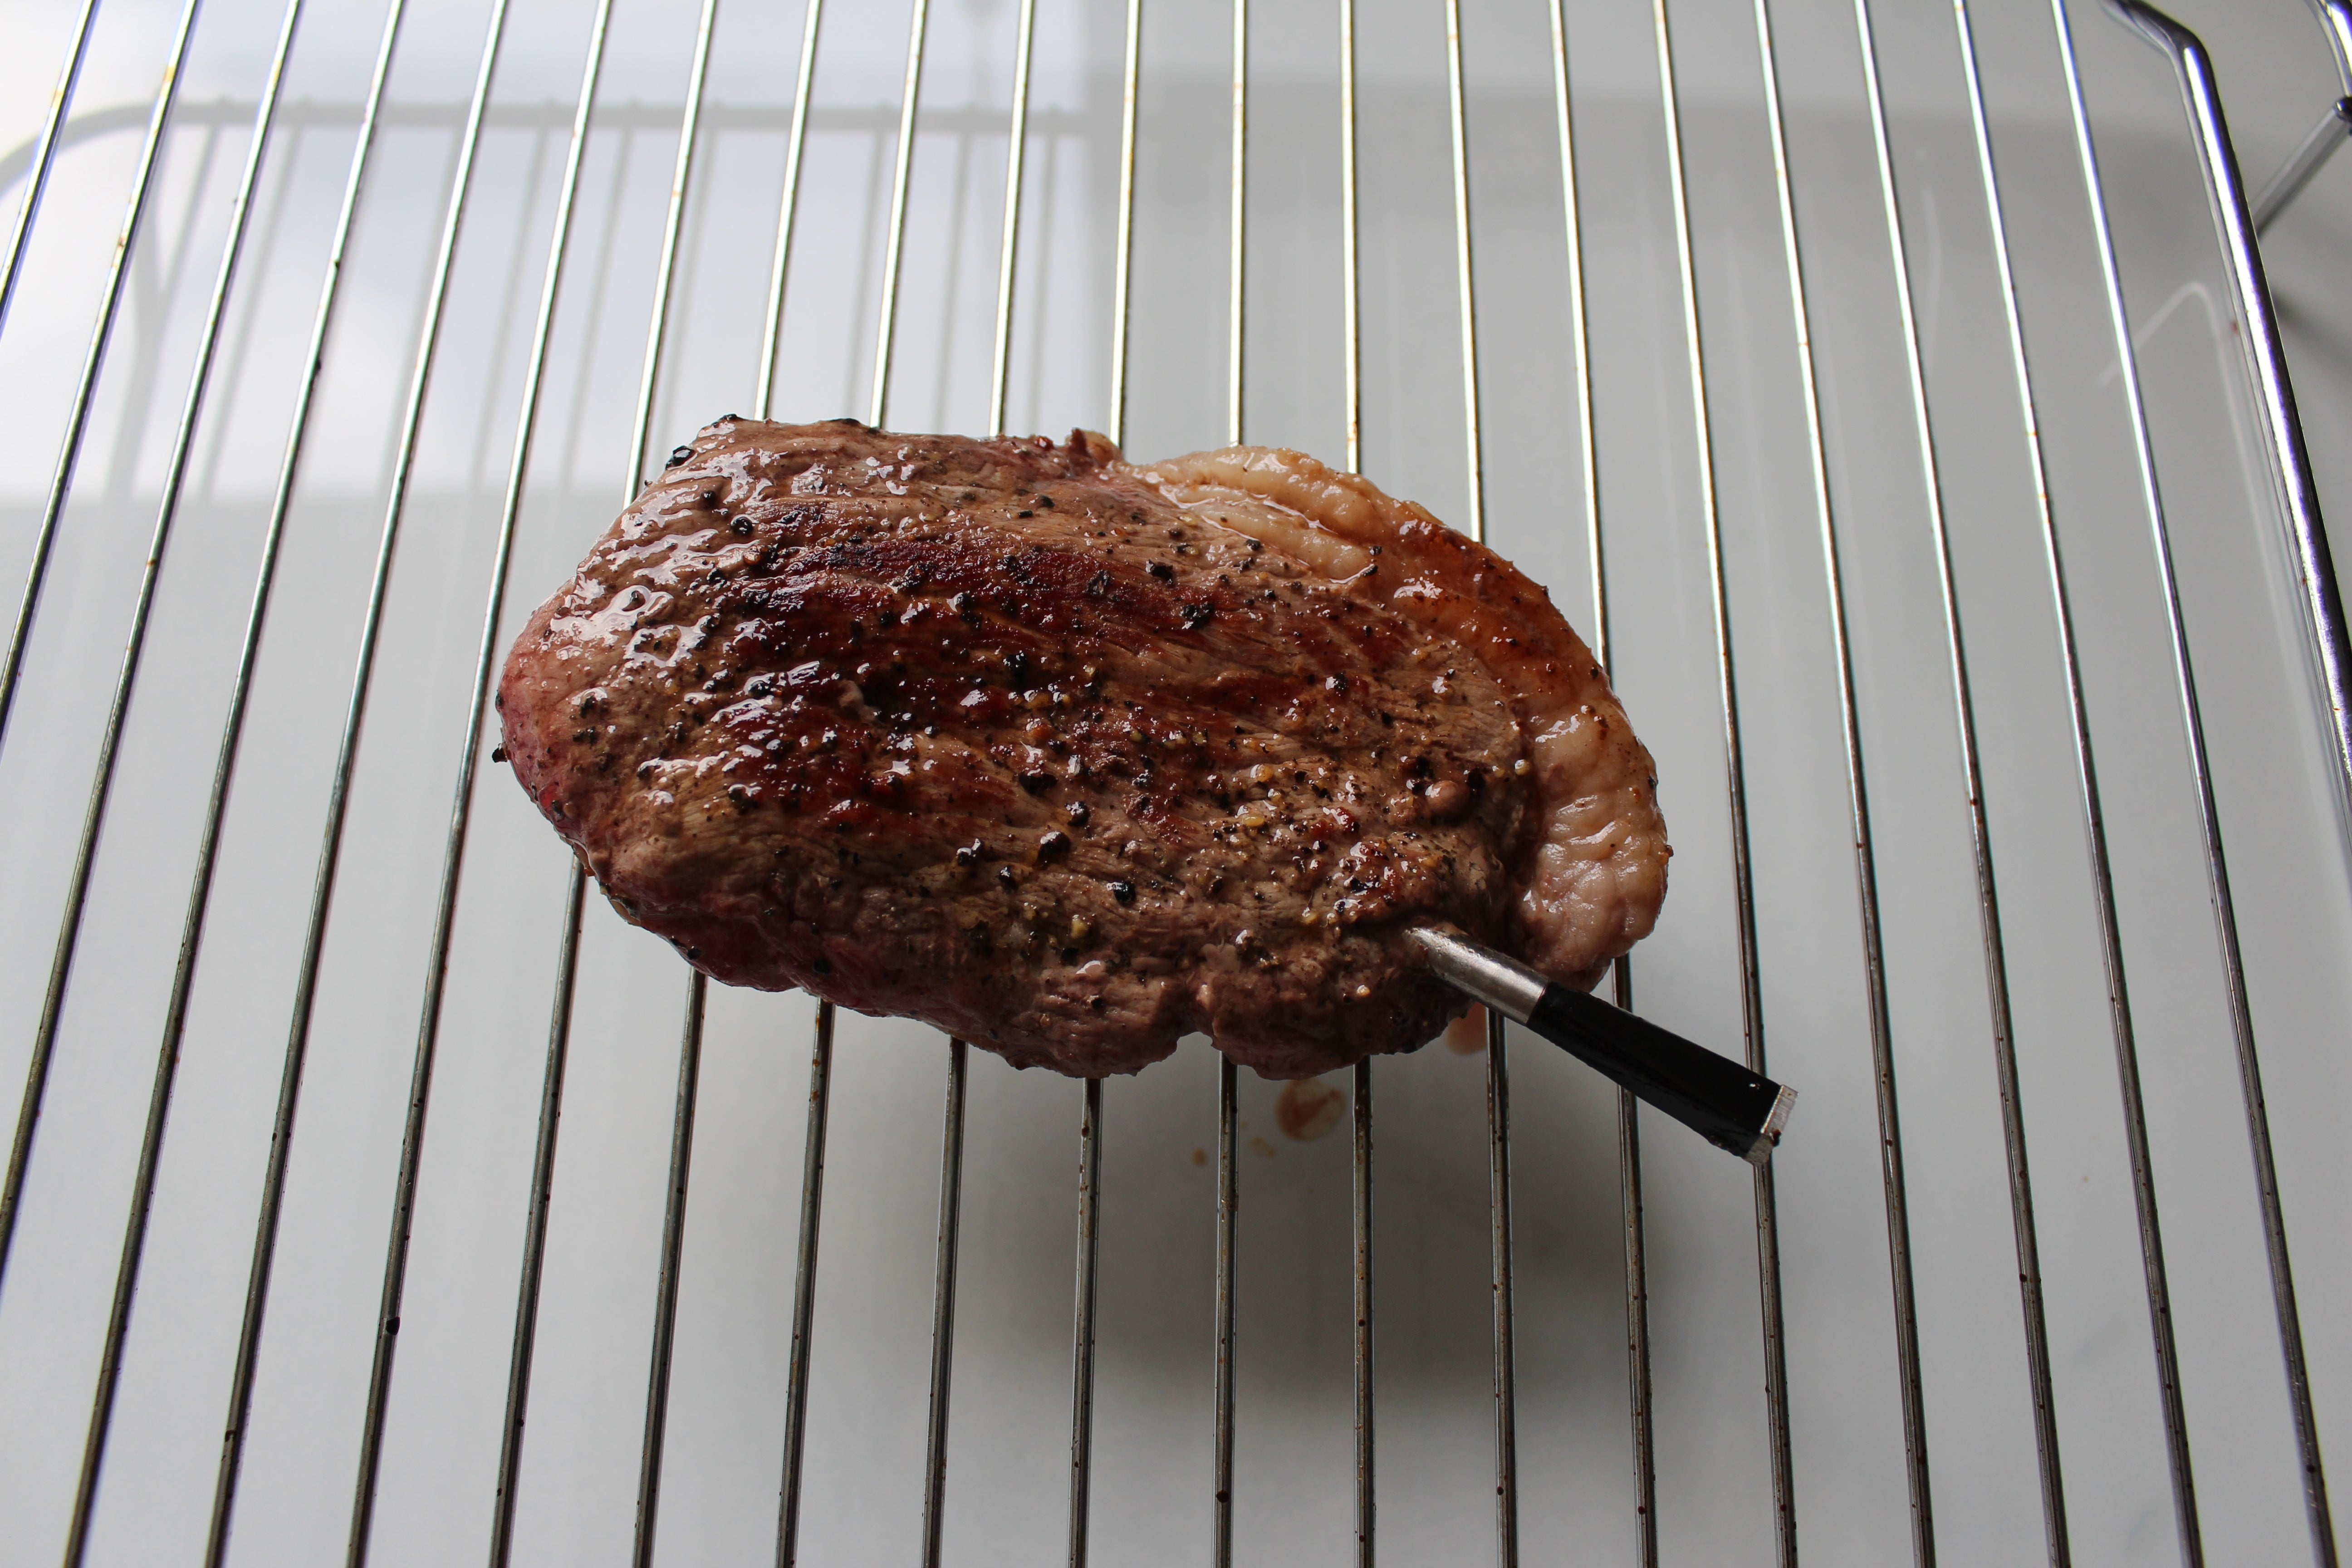 Honest MEATER Block Meat Thermometer Review: The Best Probe For